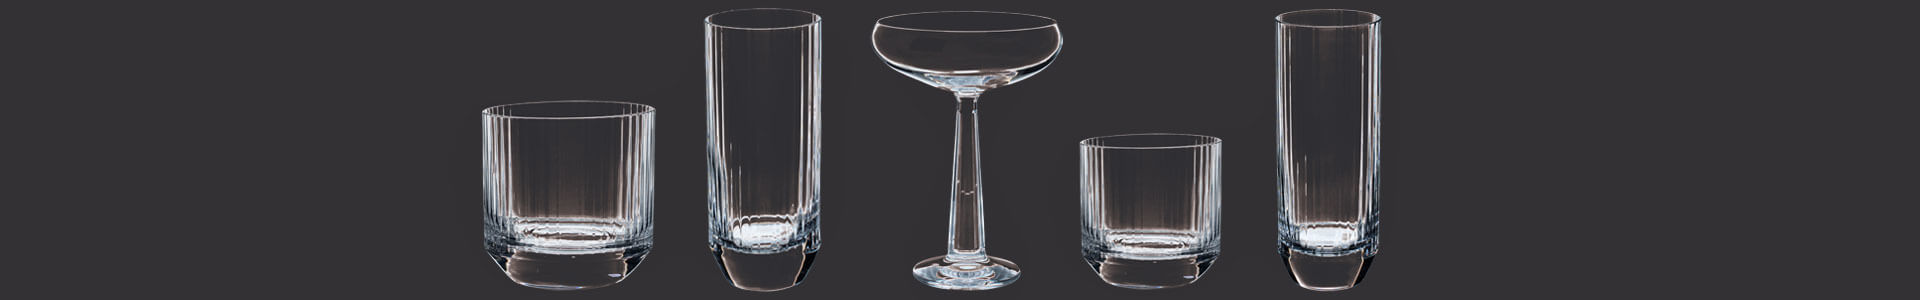 Bar glasses from the Big Top series by Nude.